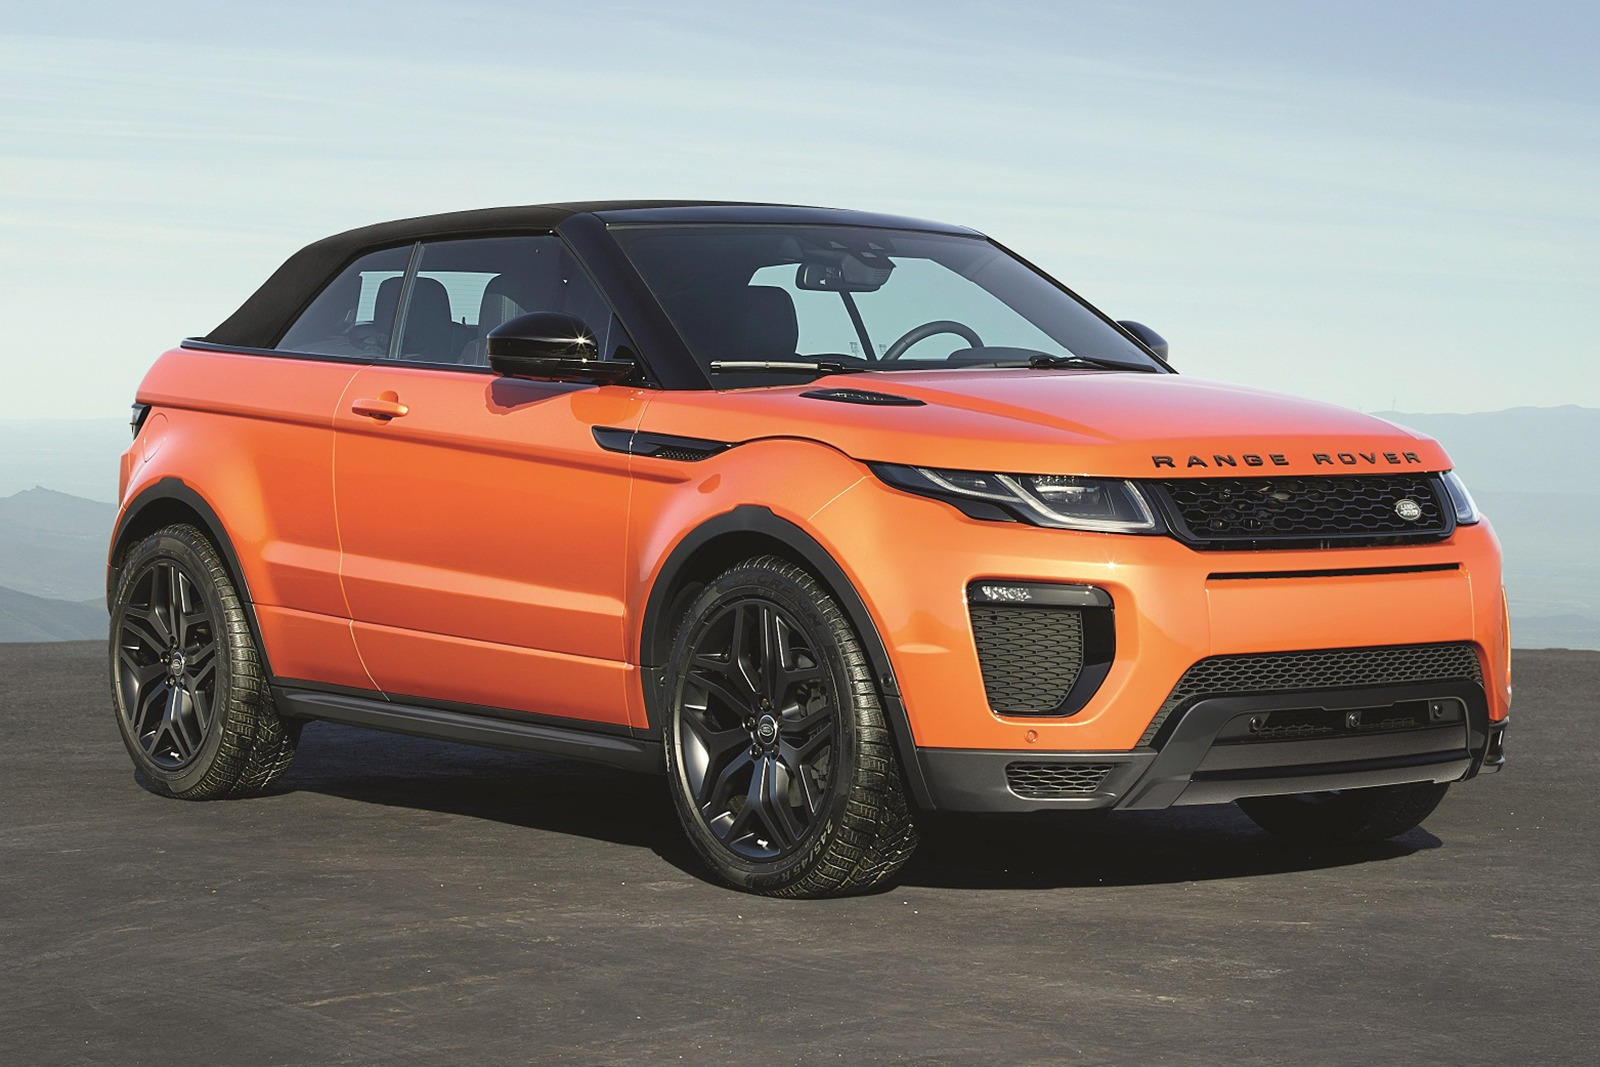 2019 Land Rover Range Rover Evoque Convertible: Review, Trims, Specs, Price,  New Interior Features, Exterior Design, and Specifications